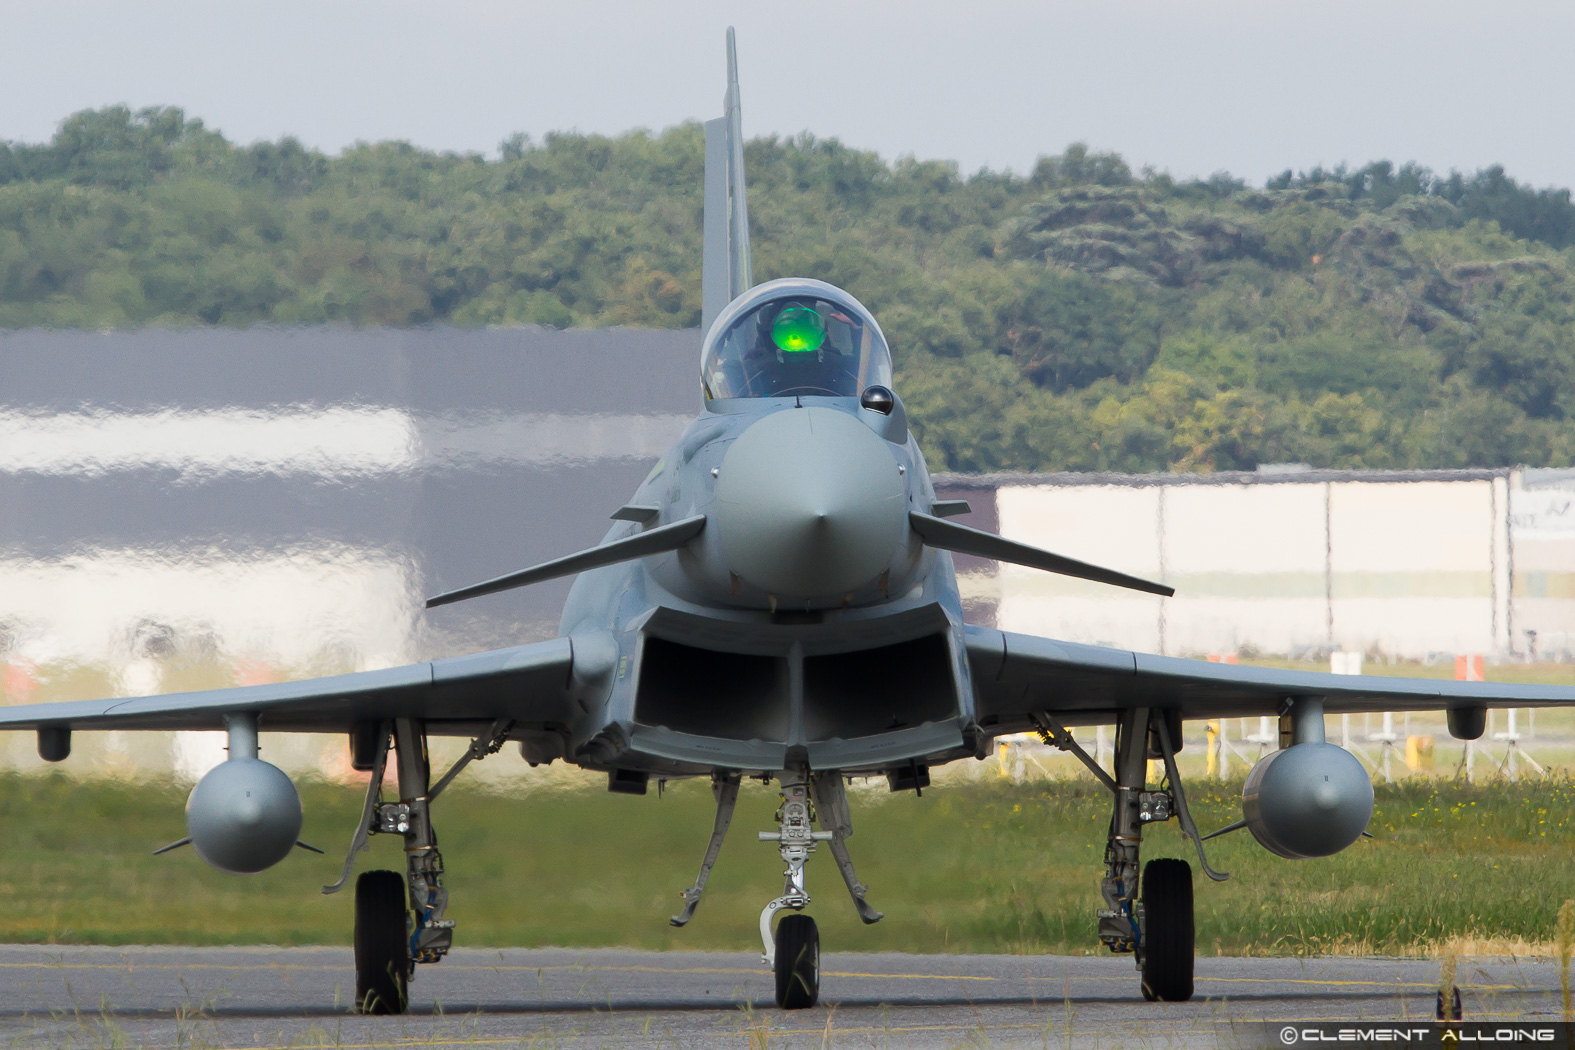 Saudi Arabia Typhoon combat aircraft, viewed from the front